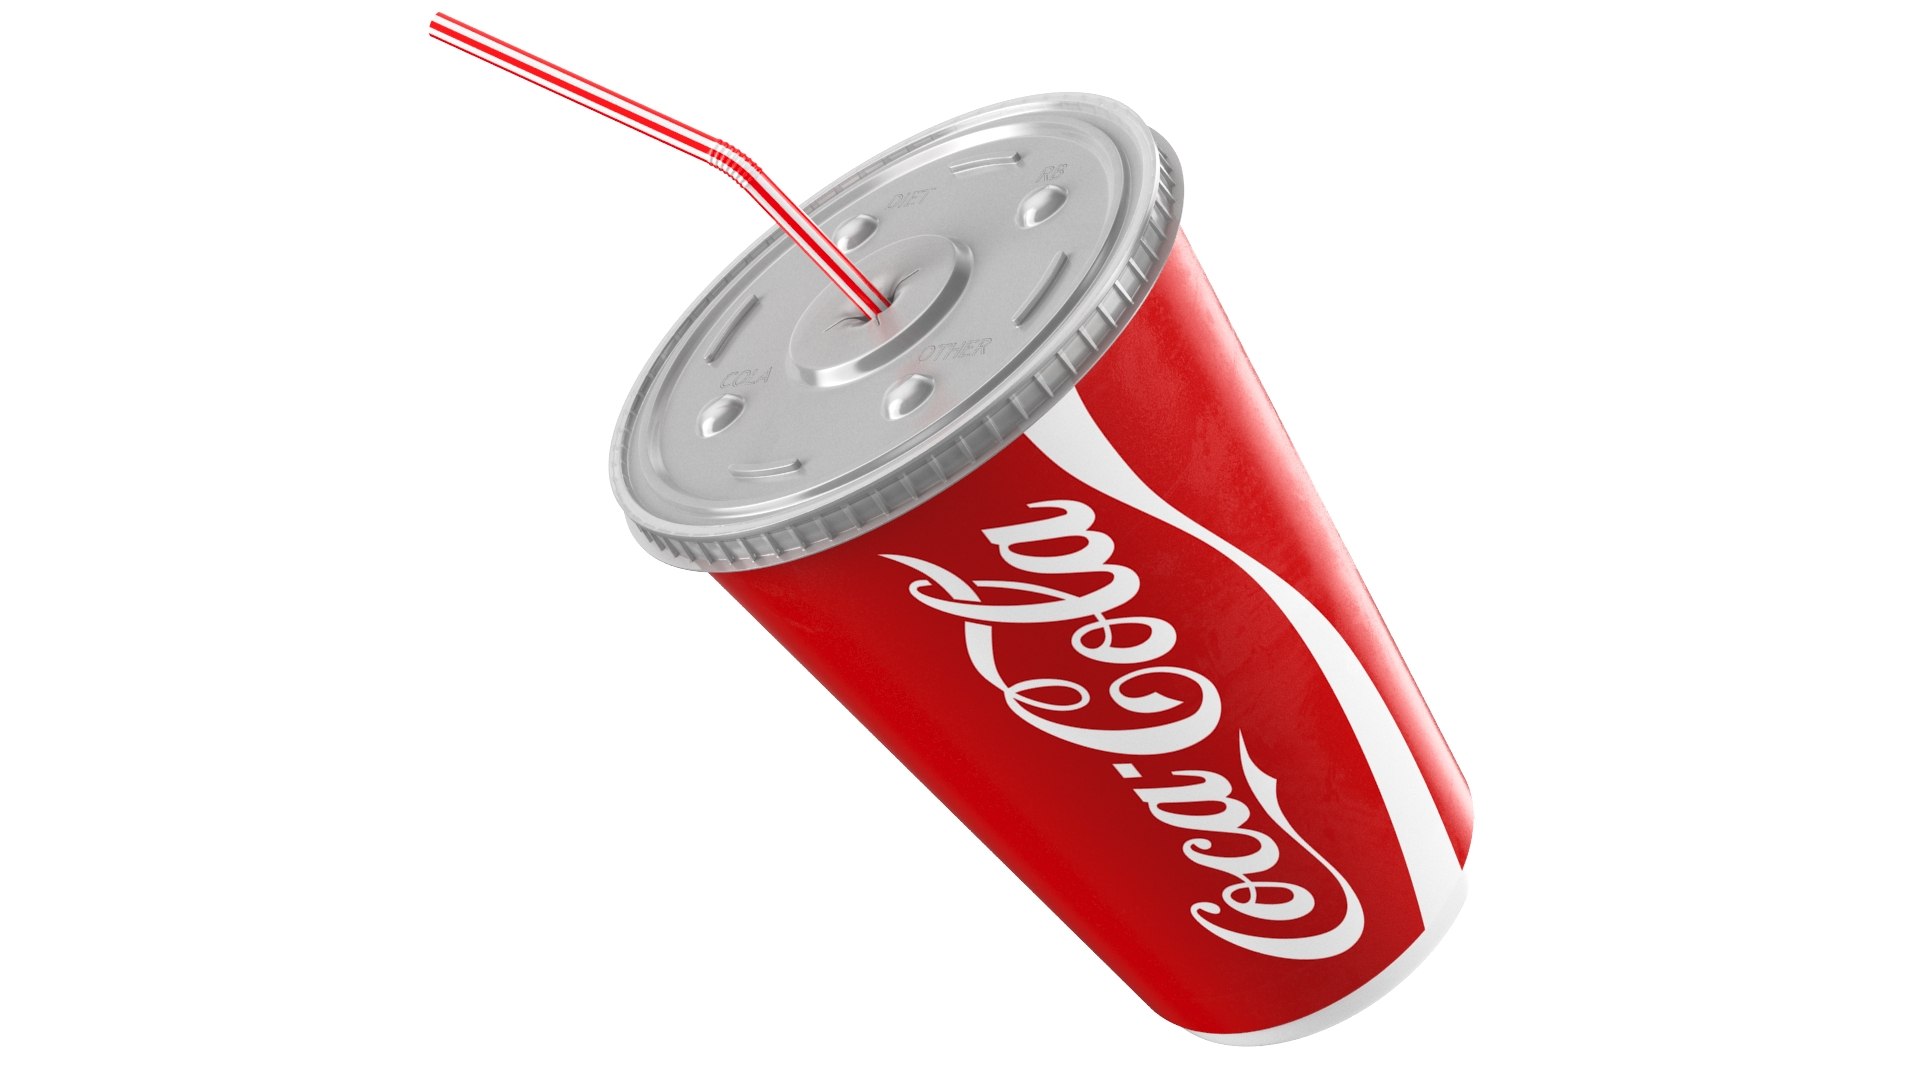 Soft drink cup 3D model